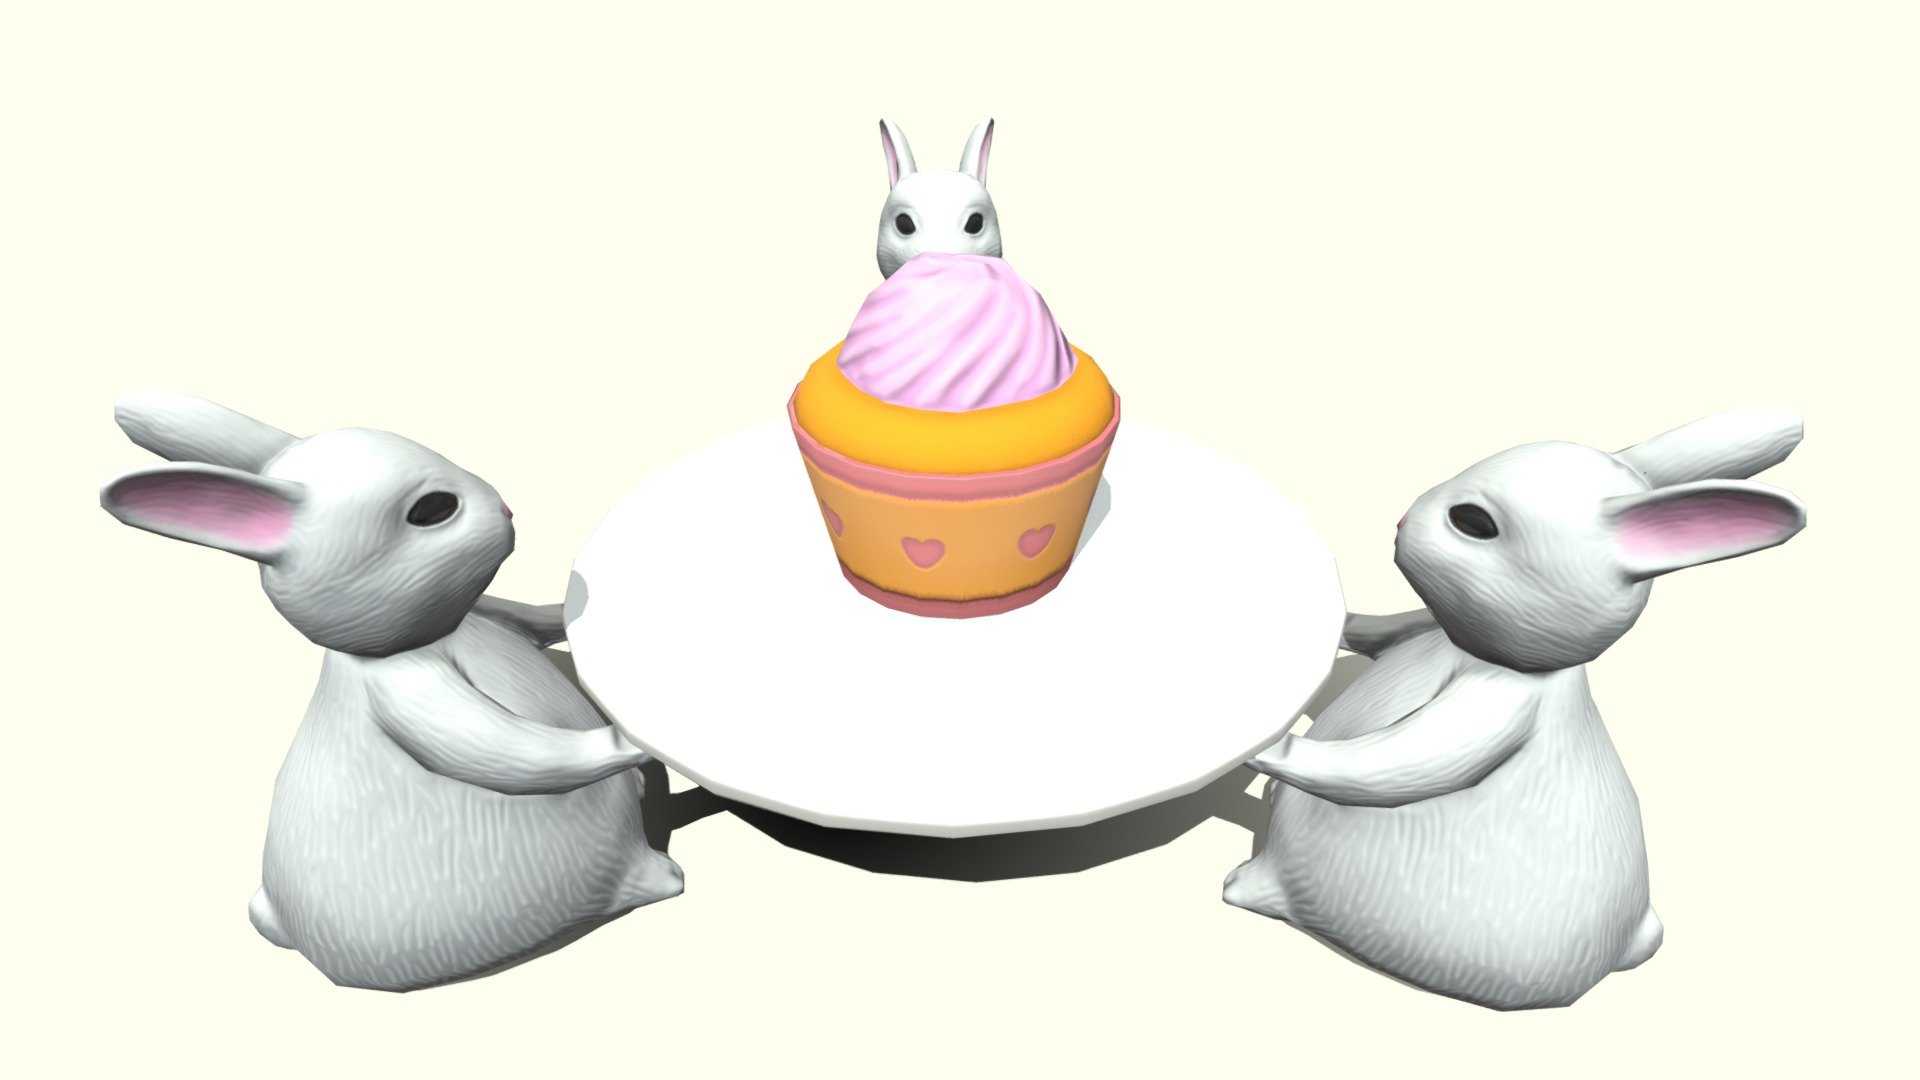 Welcome

This is the presentation of my work. The model witch you can see is made as a low poly, stylized and textured asset.

This asset pack contains:

Bunny holder, Plate, Cake.

Technical information:

Texture - 2048 x 2048

Bunny holder - 1668 tris, 834 faces, 836 verts.

Plate - 336 tris, 168 faces, 170 verts.

Cake - 380 tris, 200 faces, 192 verts.

Contact details:

lukas.boban123@gmail.com

https://www.facebook.com/lukas.boban/

Thank you for taking look please consider leave like 3d model